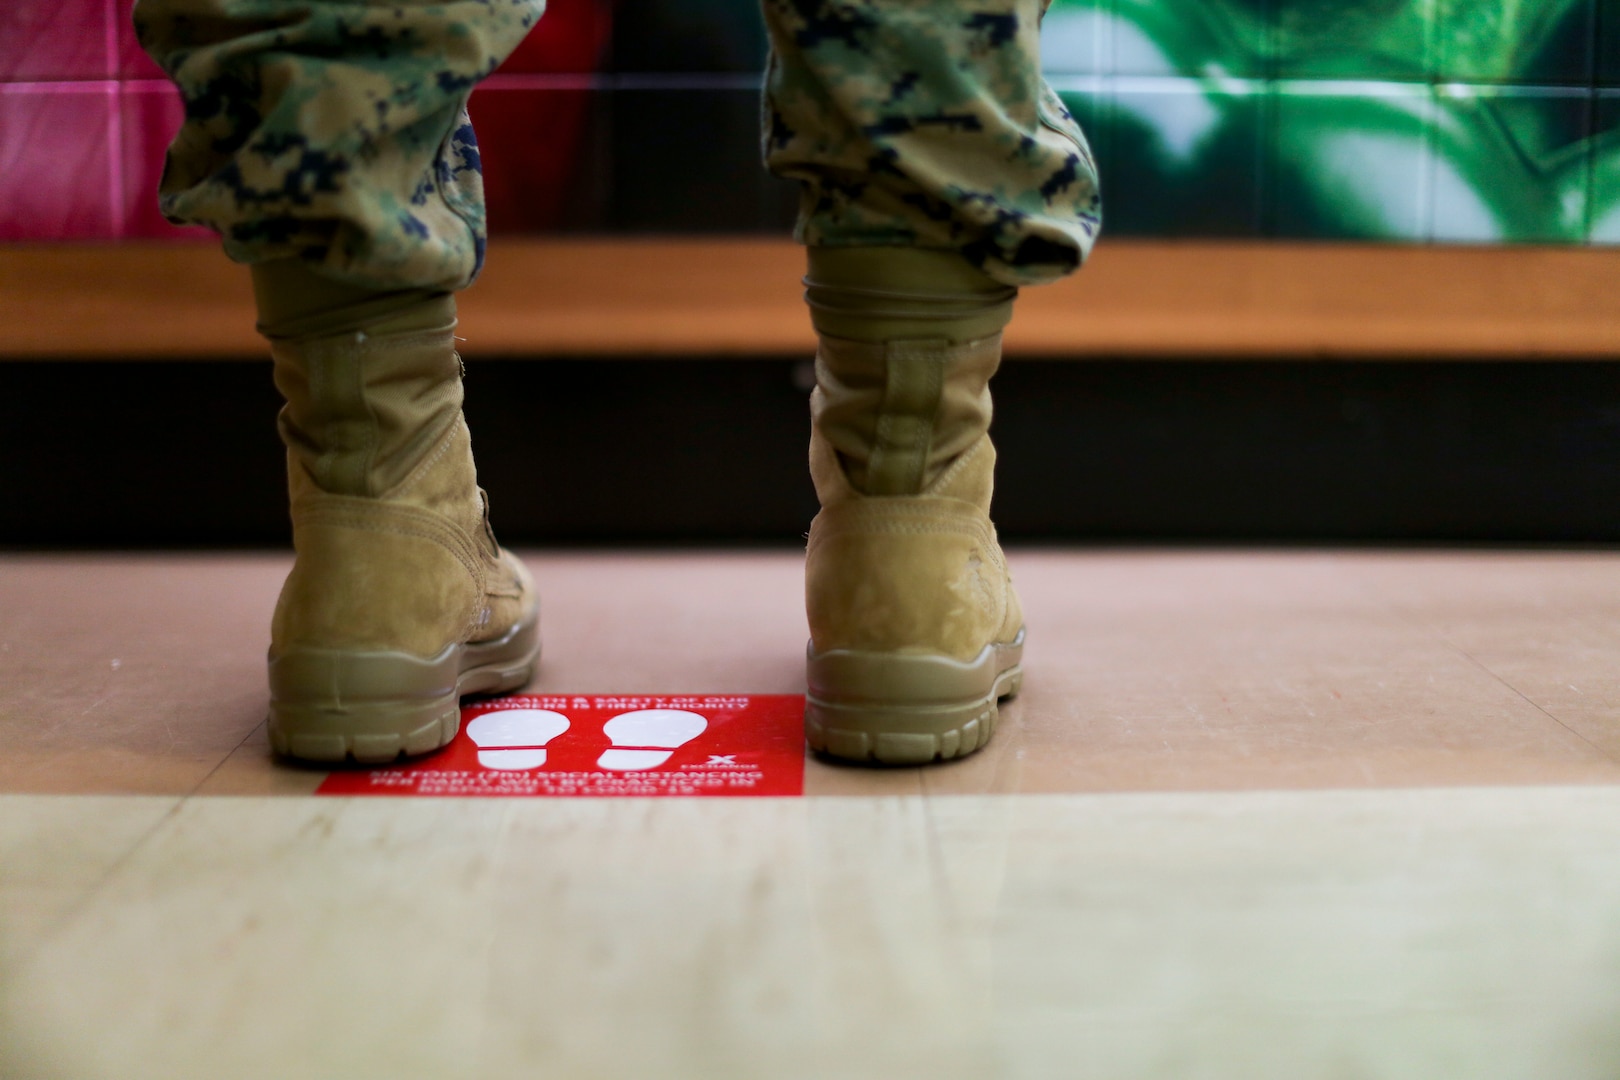 A service member stands by a red sign with footprints on the floor.